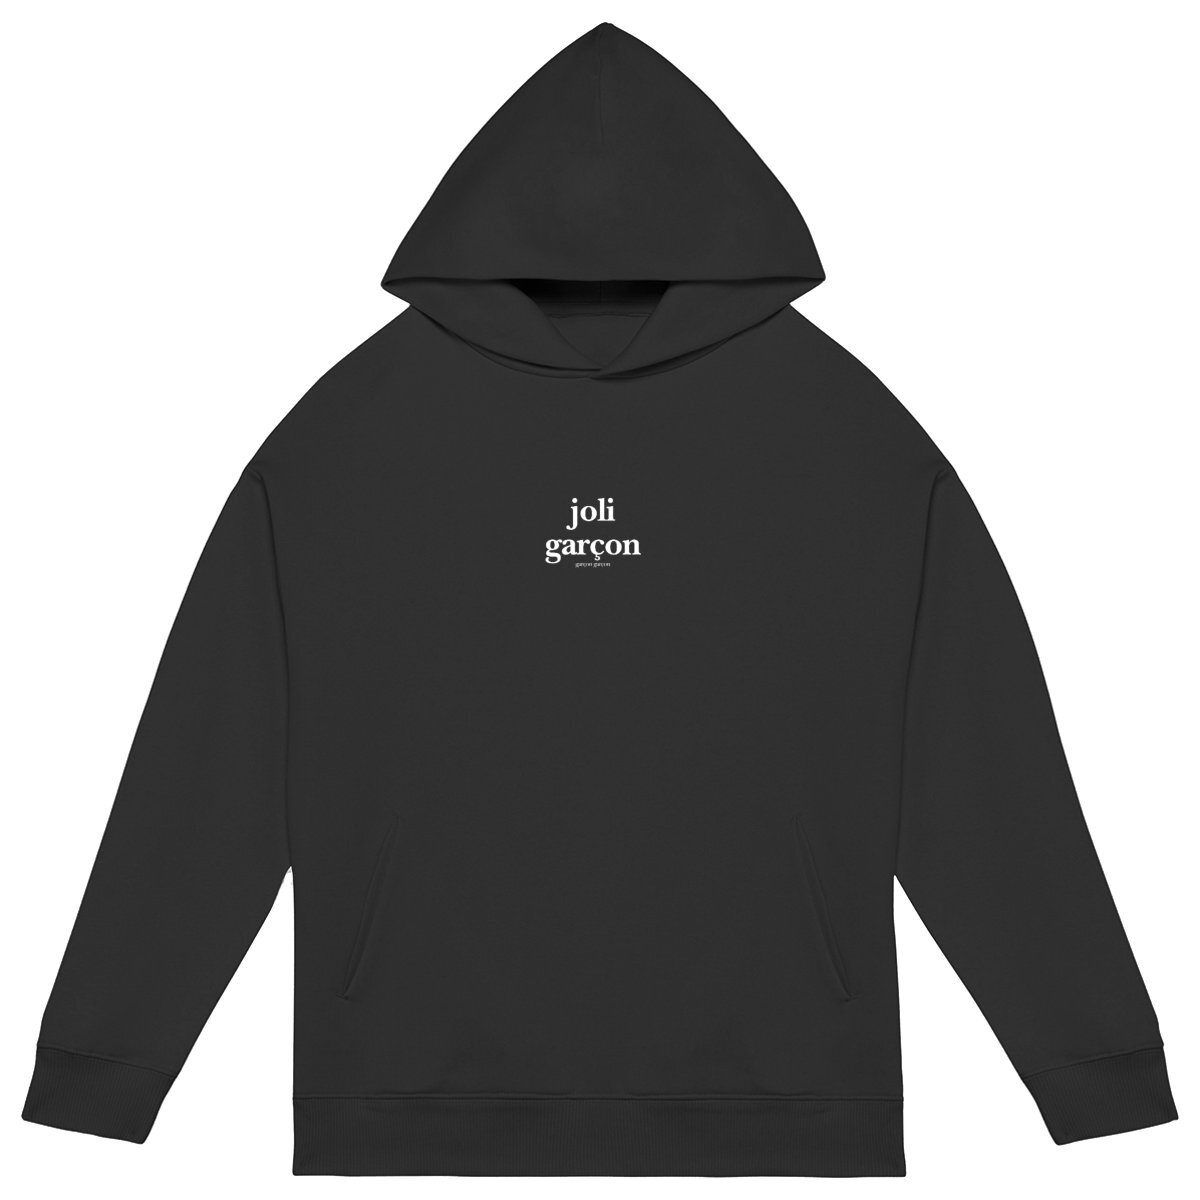 joli garçon hoodie over. garçon garçon essentiel oversized hoodie. Sleek in black and whispering Parisian chic, this hoodie is the sartorial whisper of 'garçon garçon' — a statement of understated elegance. Perfect for those who carry a piece of Paris in their hearts and a touch of audacity on their sleeves.